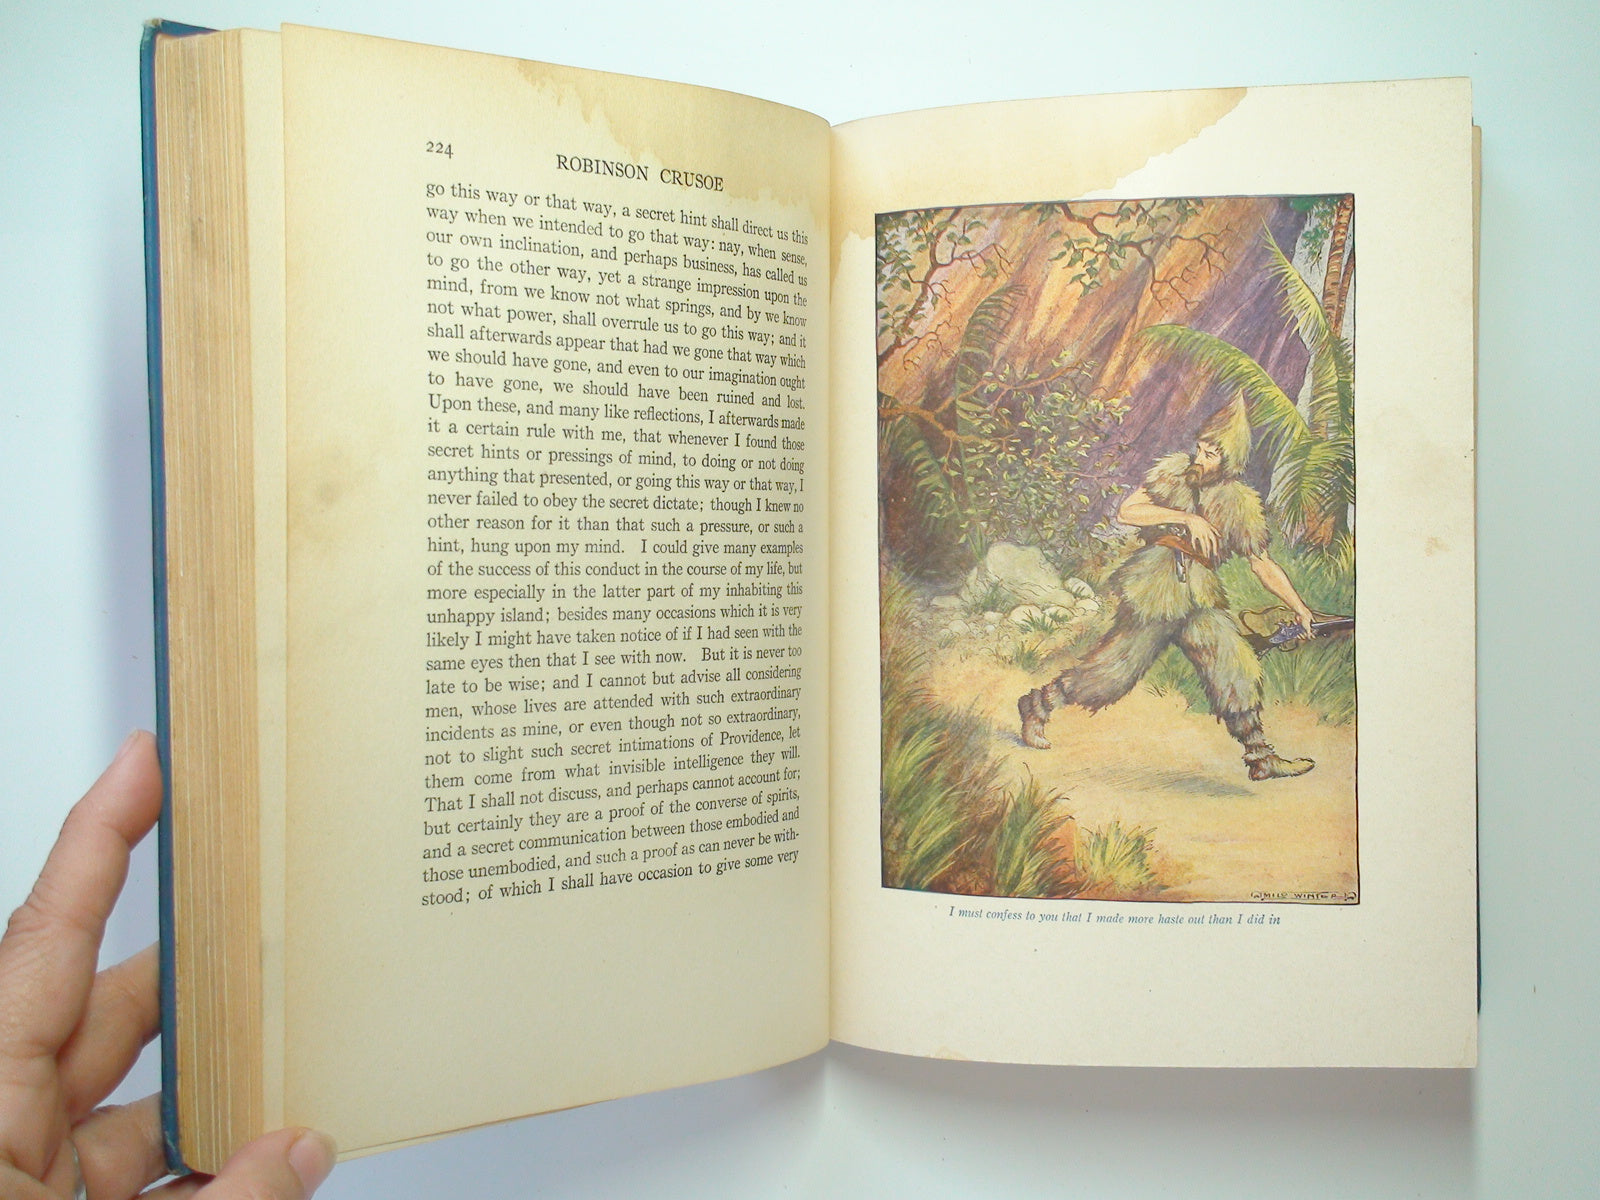 Life and Adventures of Robinson Crusoe by Daniel Defoe, Illustrated, 1916